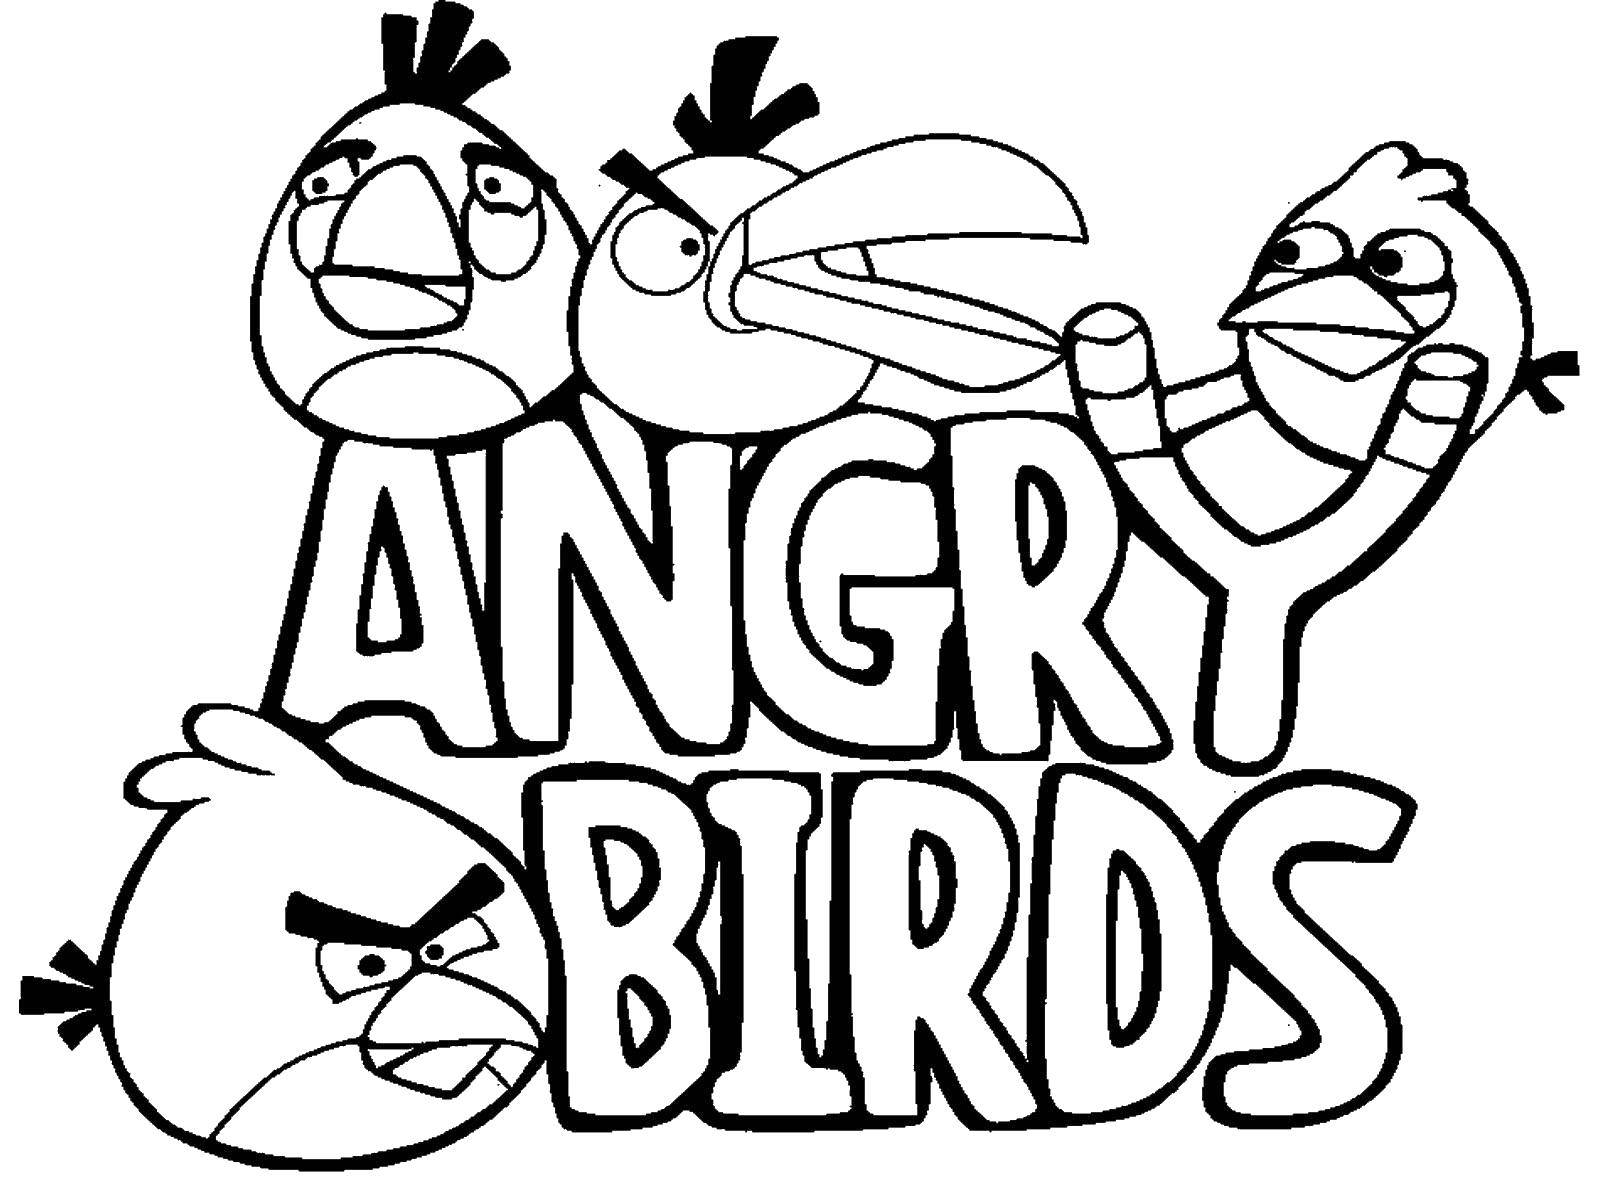 Coloring  angry birds . Category The character from the game. Tags:  Games, Angry Birds , game.